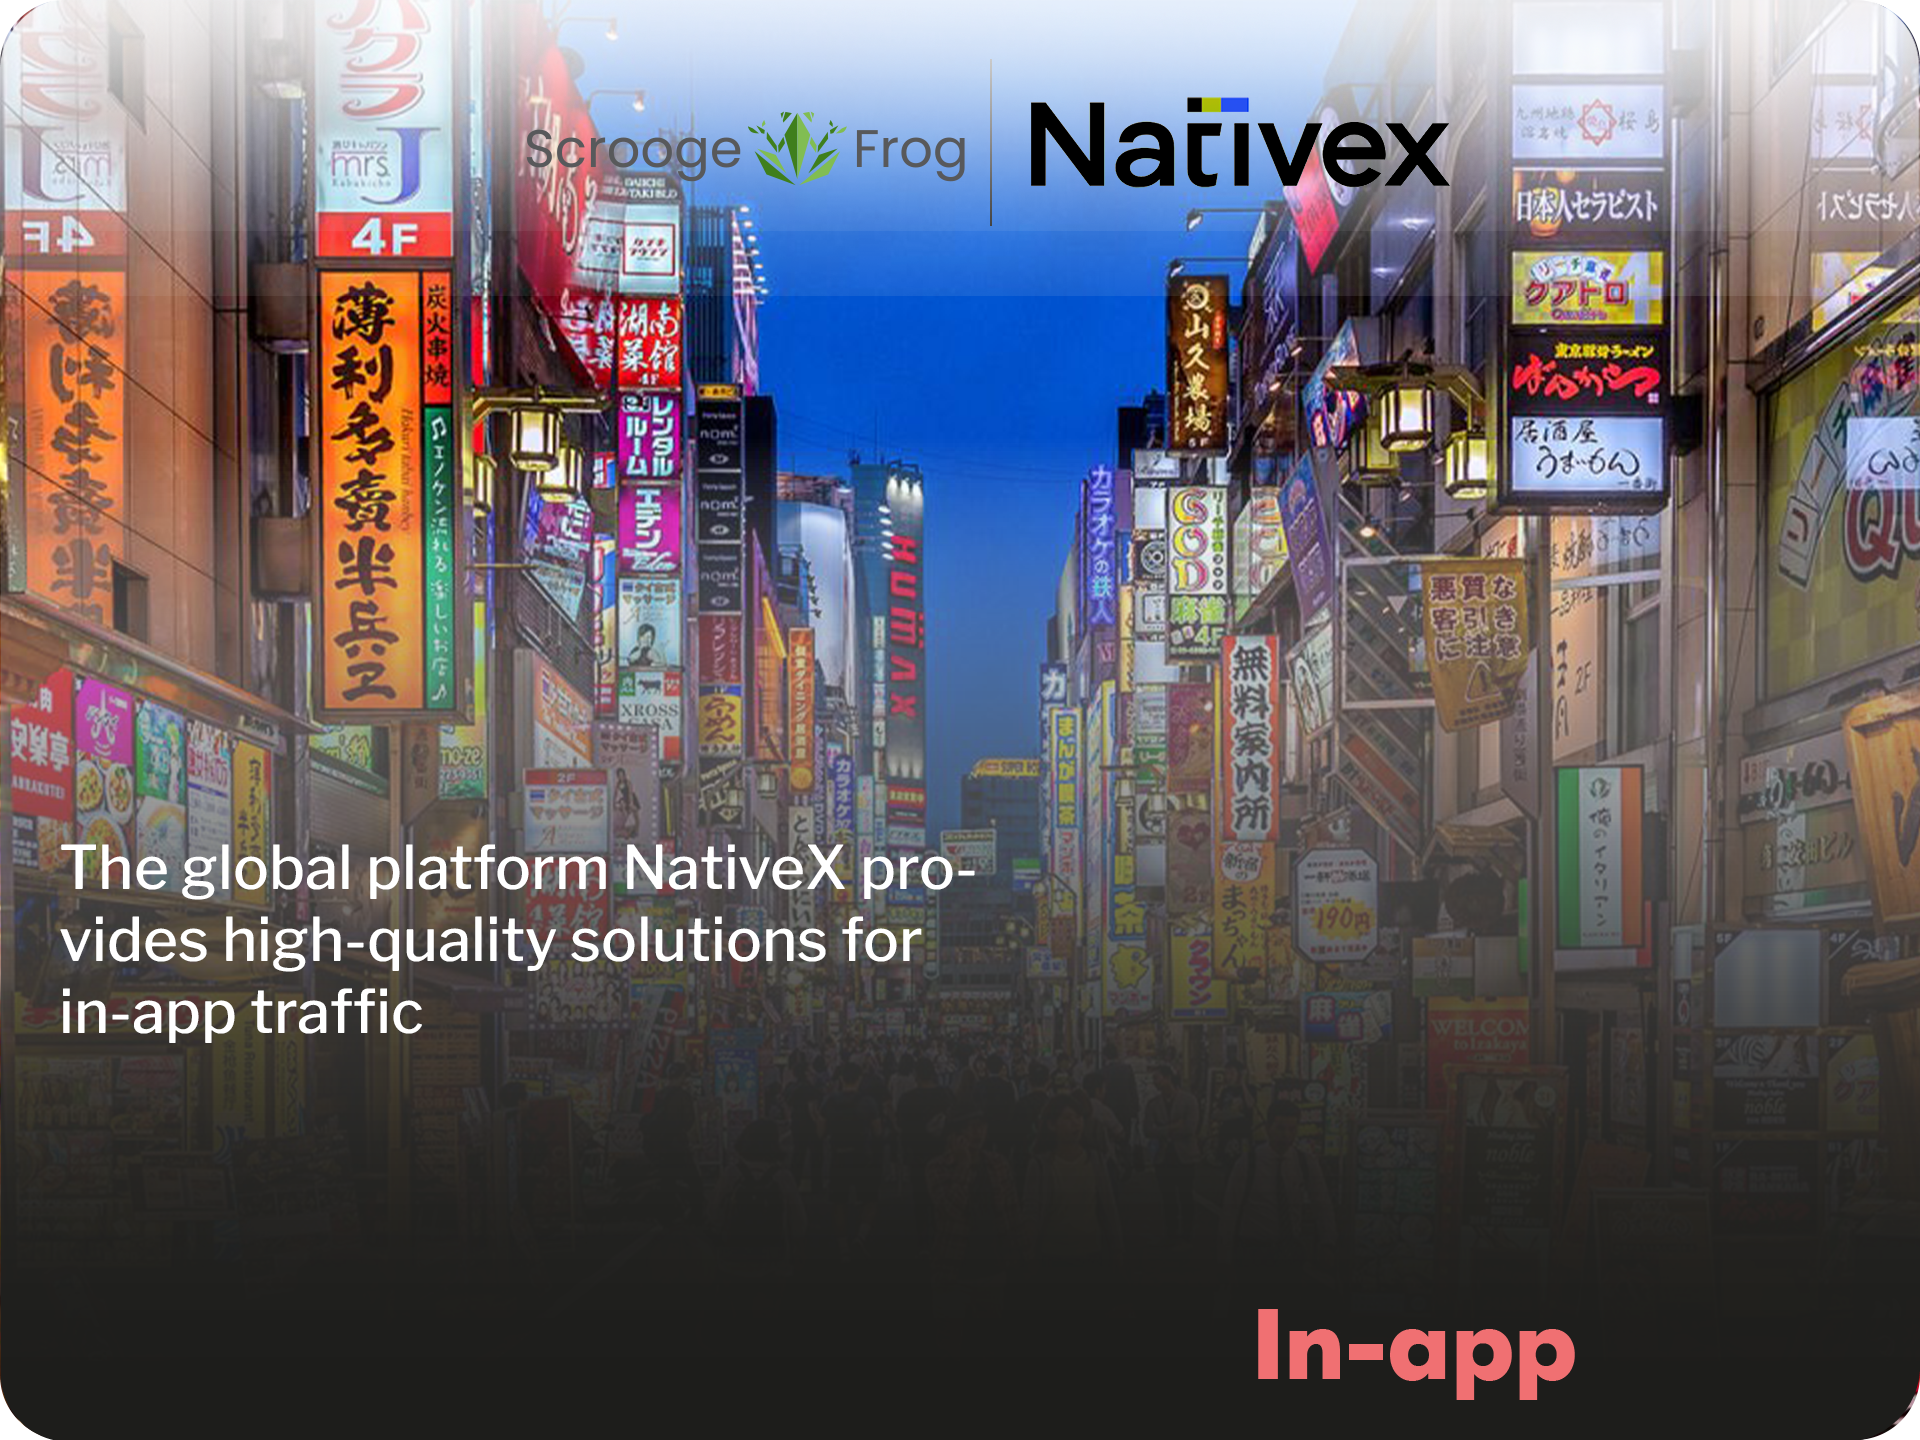 The global platform NativeX provides high-quality solutions for in-app traffic